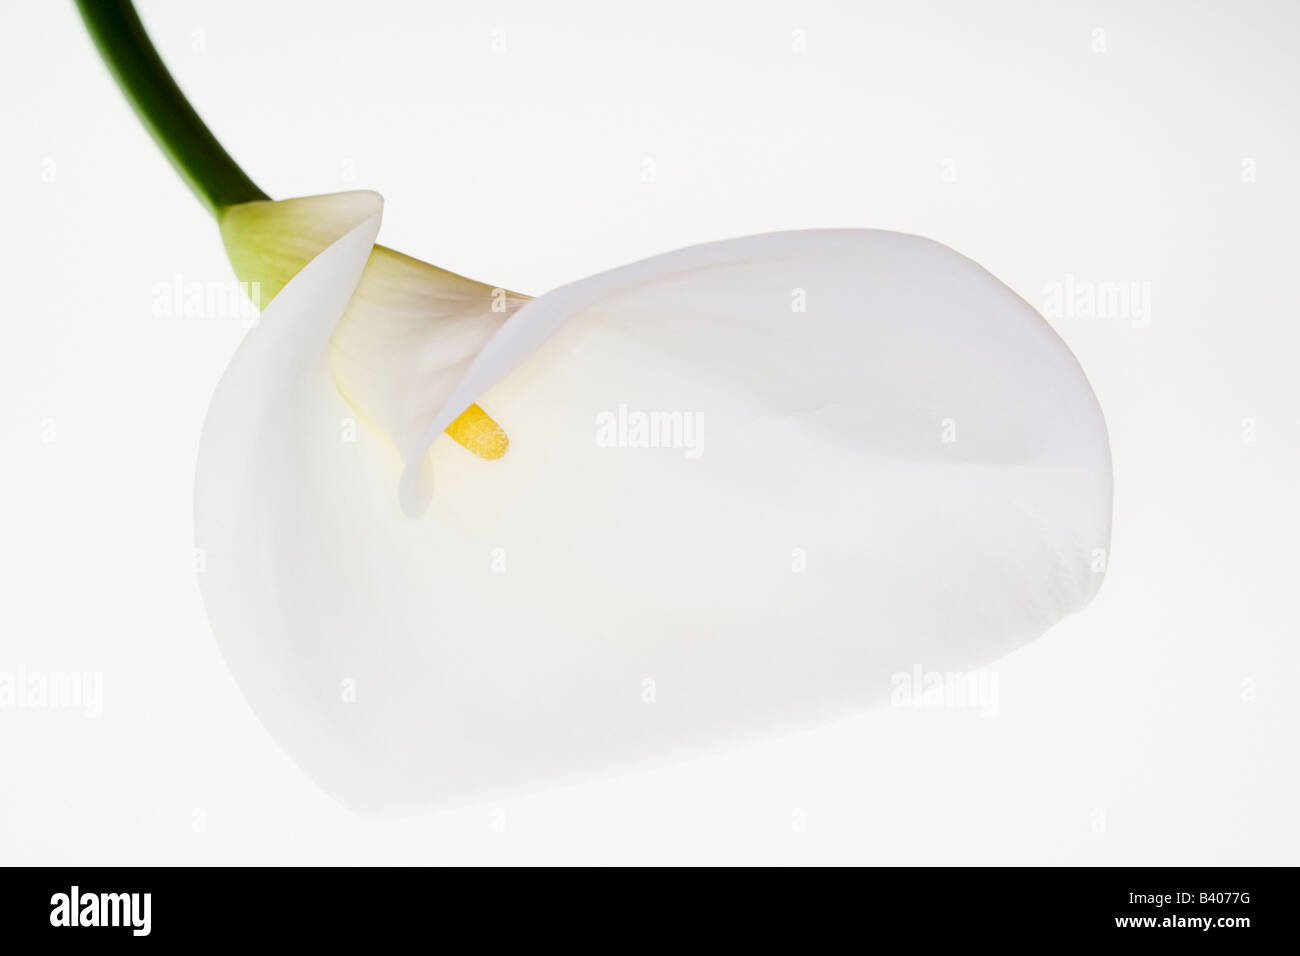 Calla Lilly Flower Stock Photo